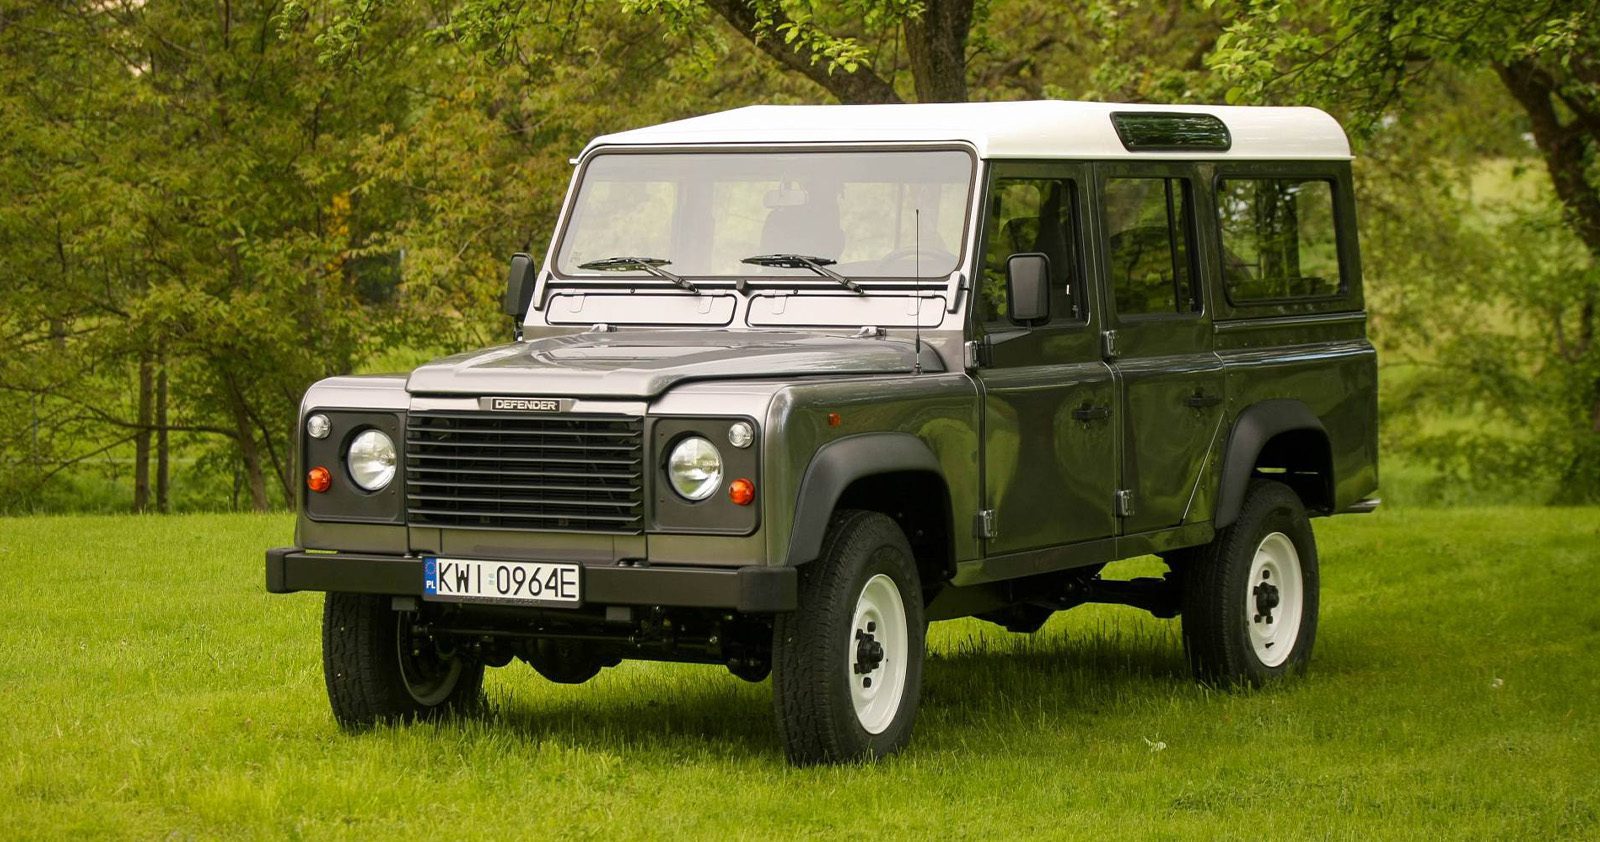 1994 military green Land Rover Defender 110 on countryside